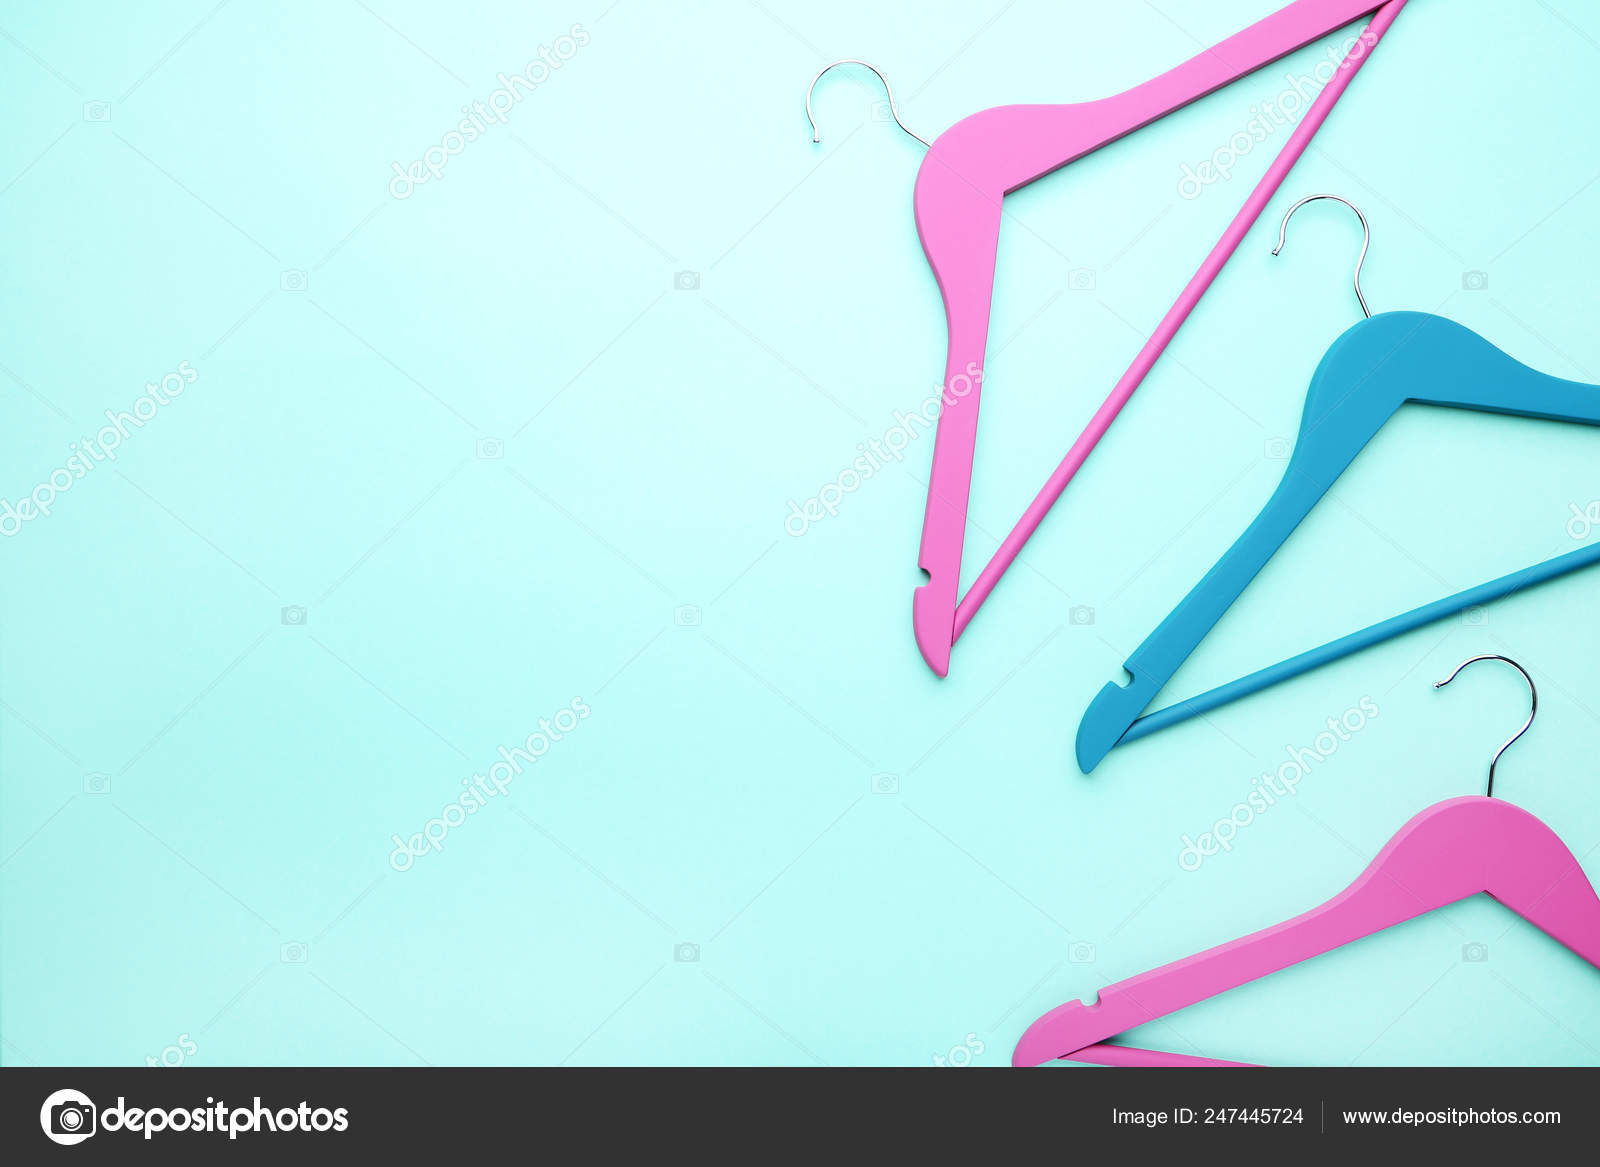 Simple Blue Cartoon Hangers Seamless Background Pattern Stock Illustration   Download Image Now  iStock